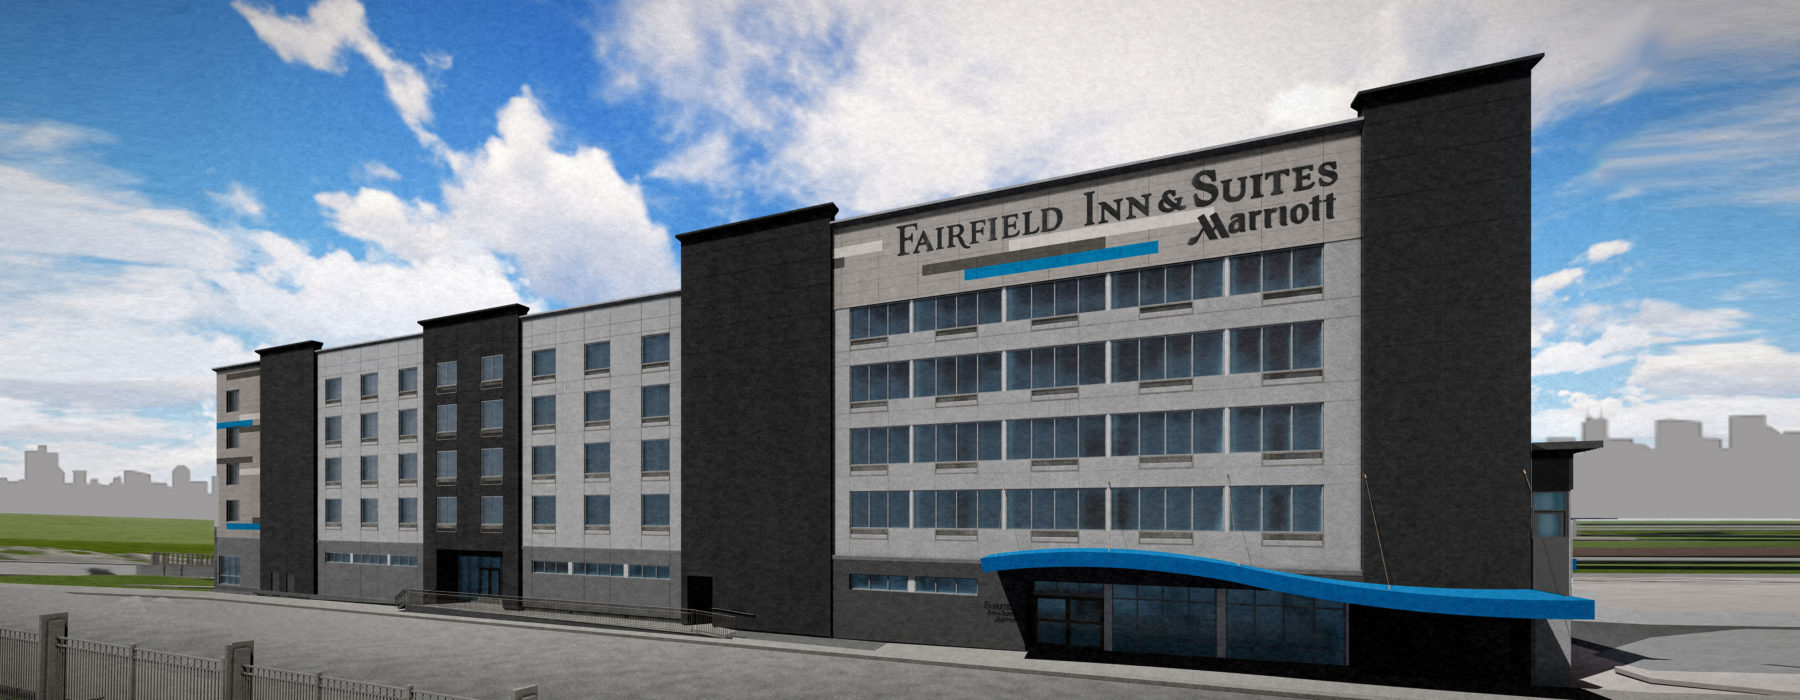 Front of Fairfield Inn & Suites by Marriott